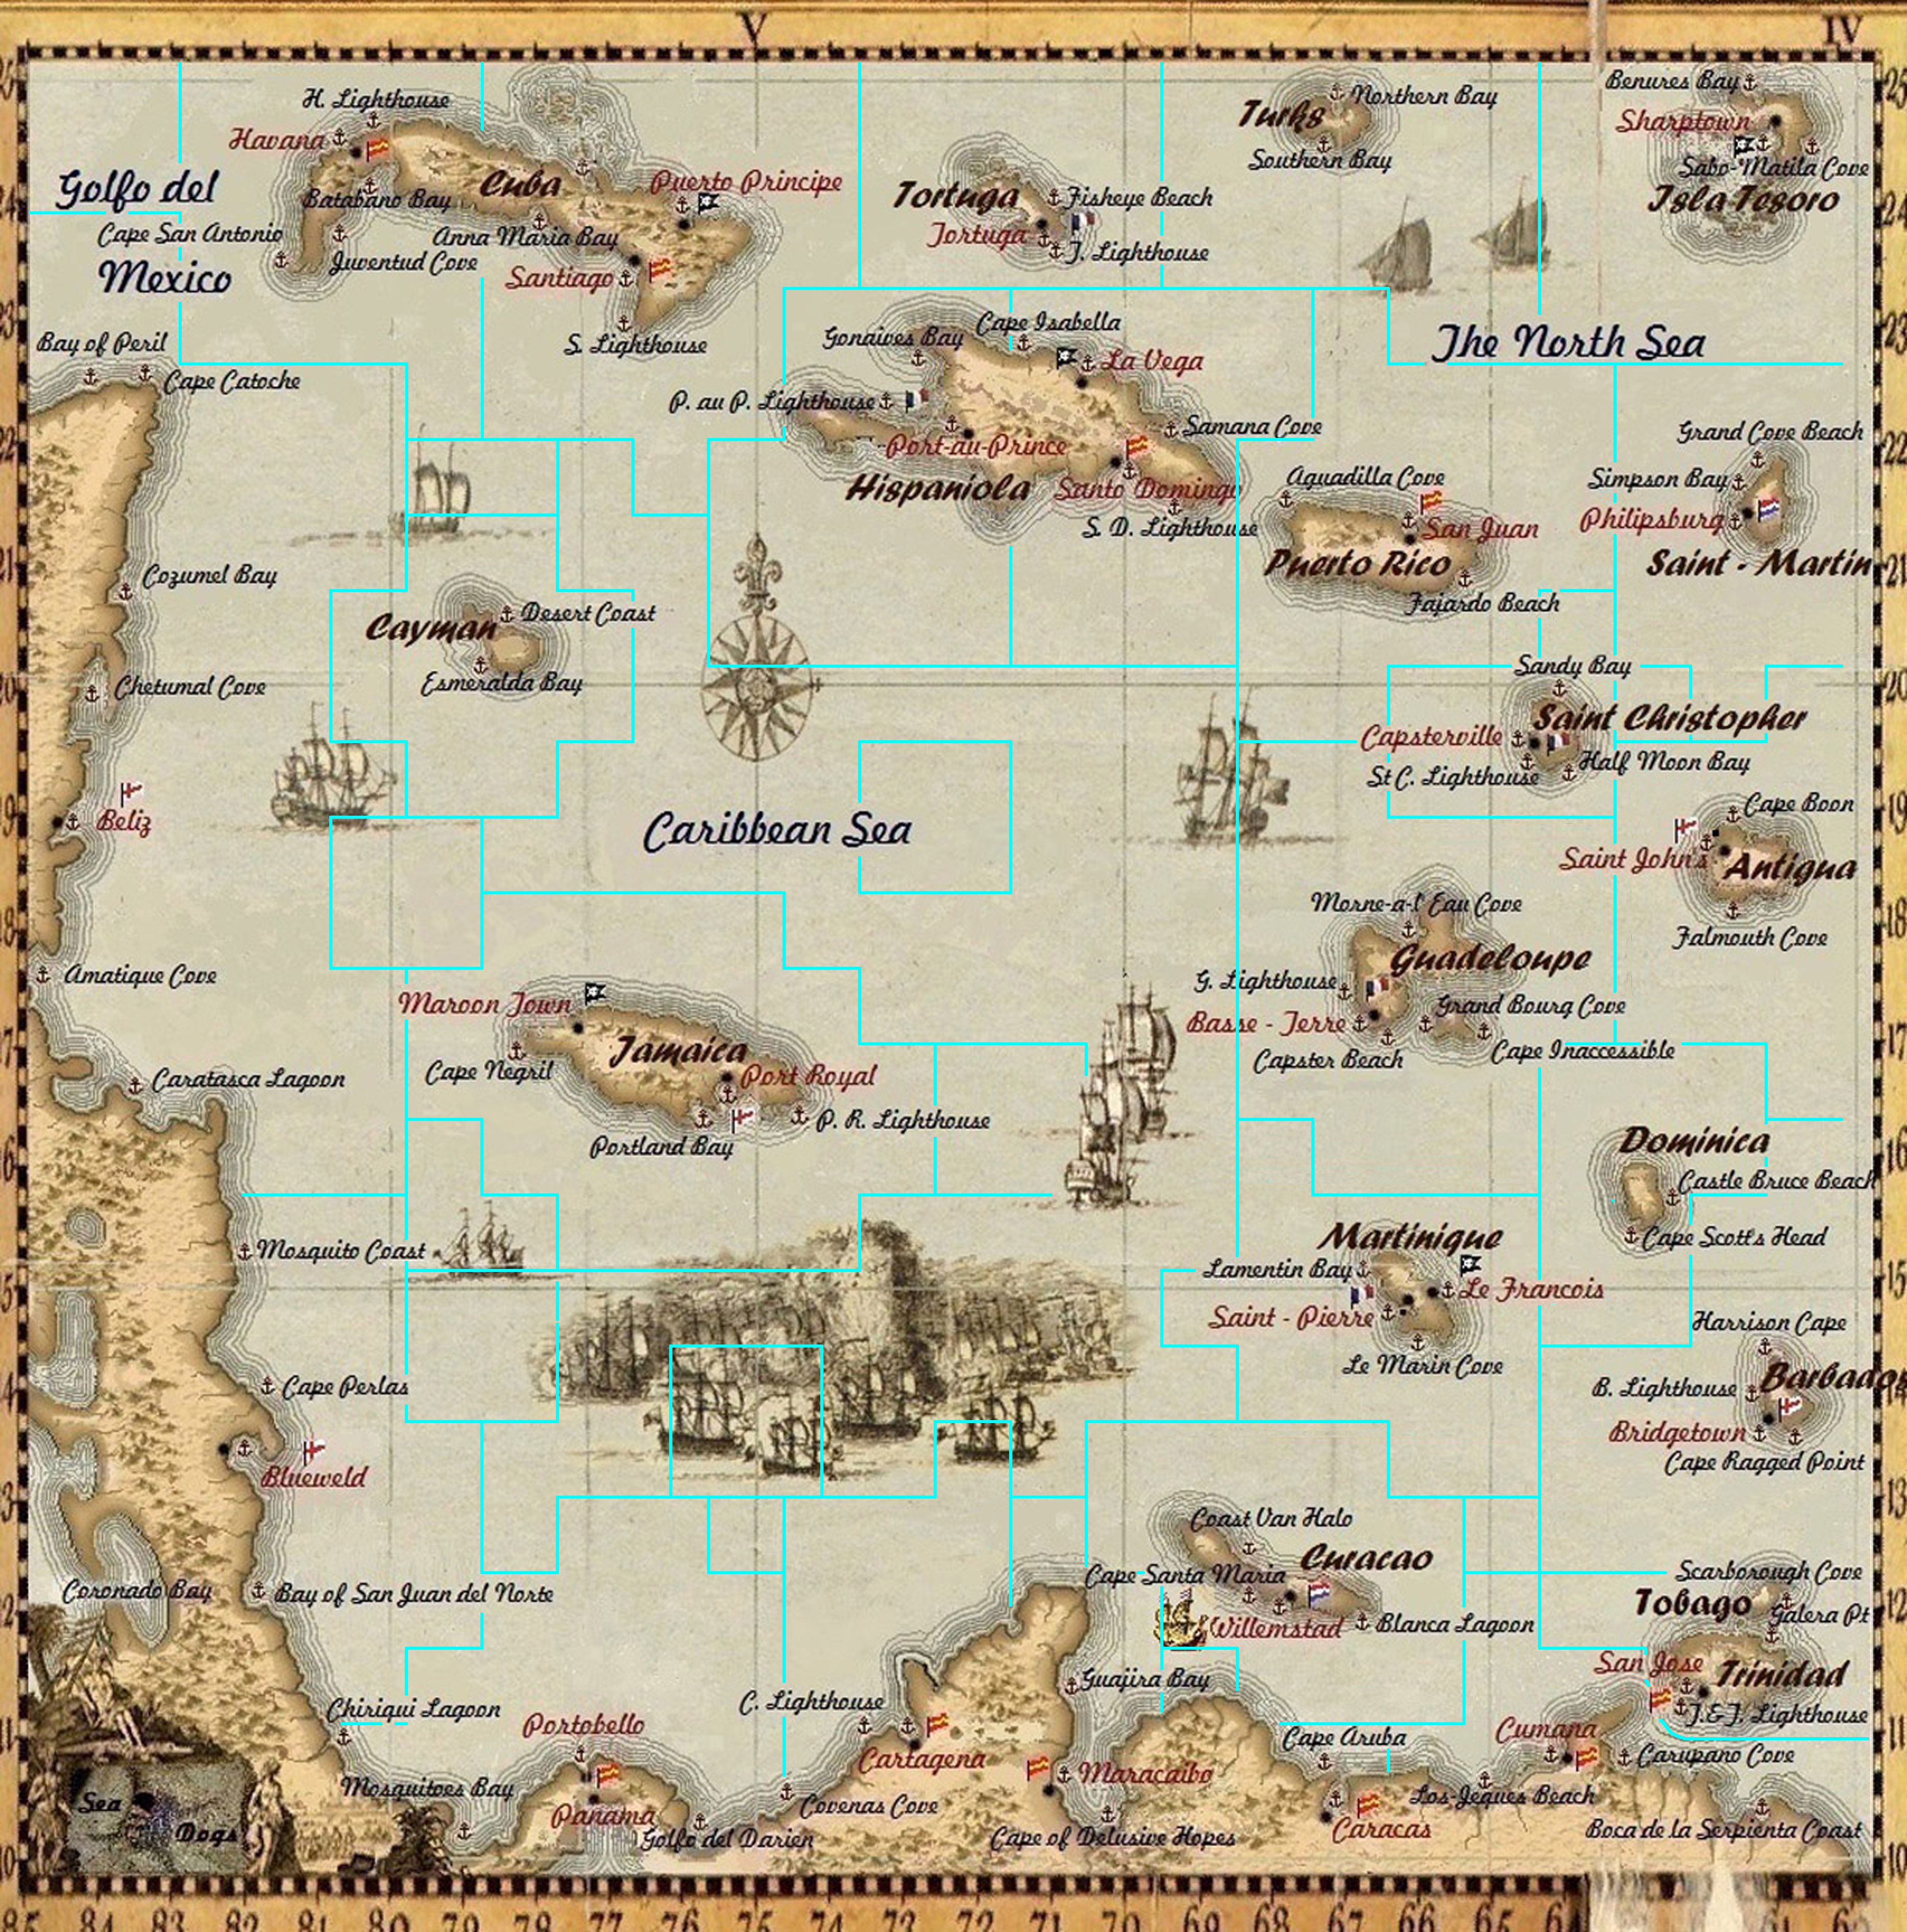 steam-community-sea-dogs-map-with-region-boundaries